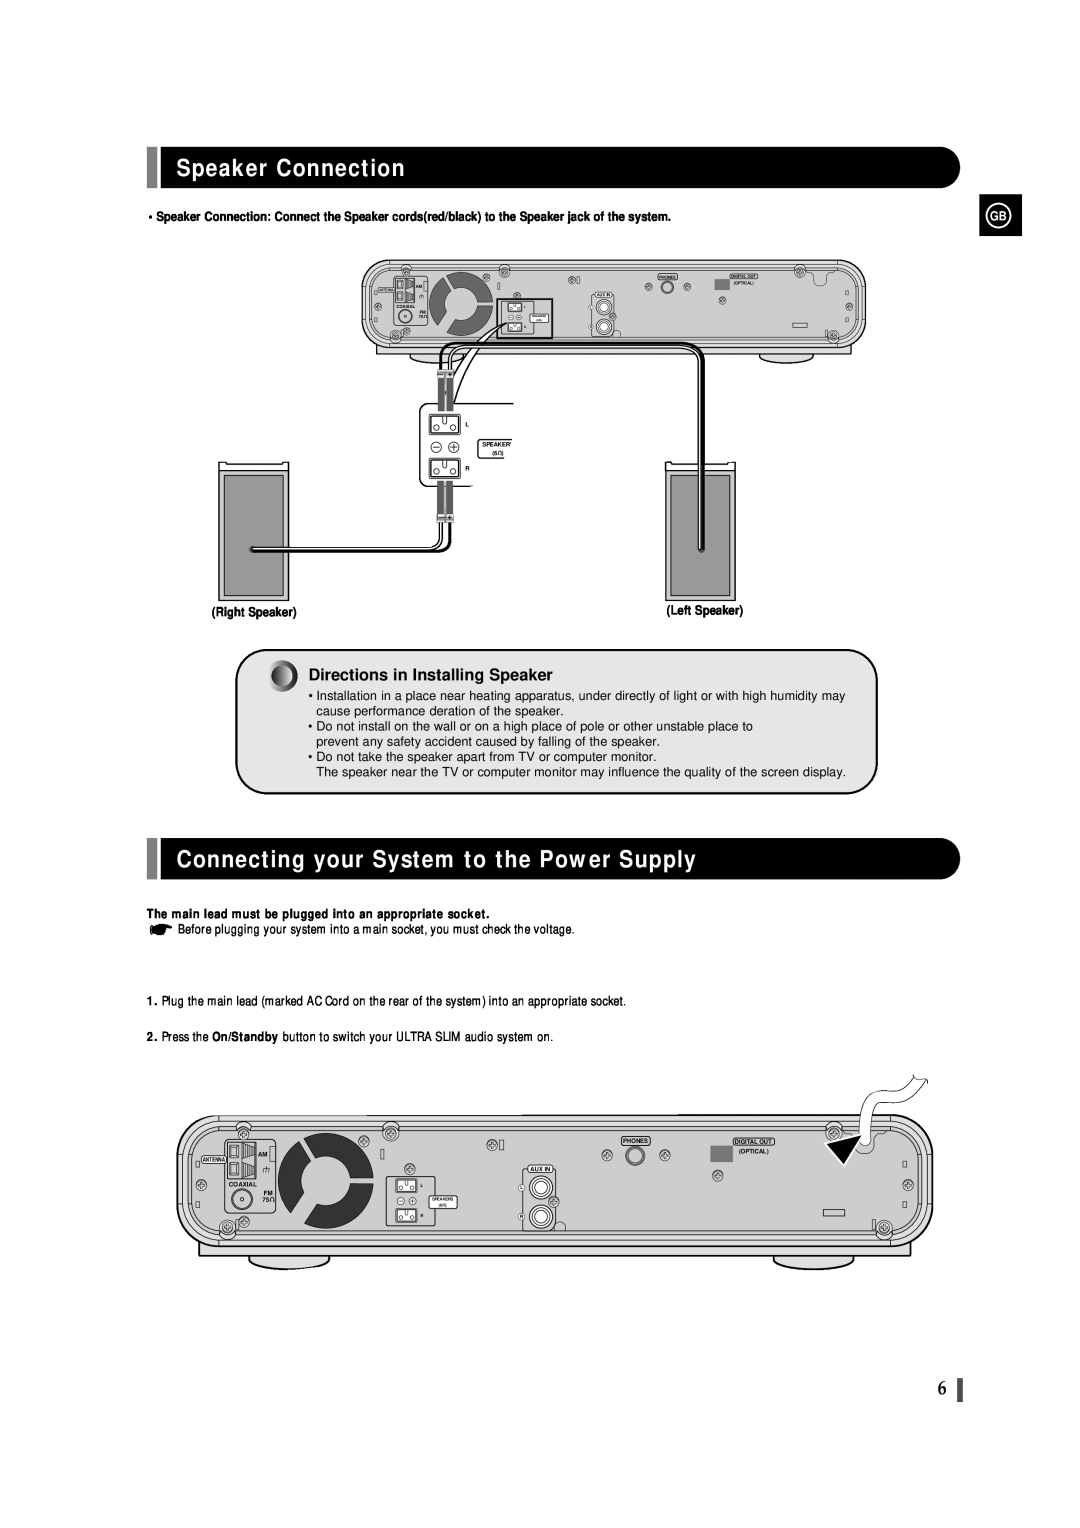 Samsung EV-1S Speaker Connection, Connecting your System to the Power Supply, Directions in Installing Speaker 